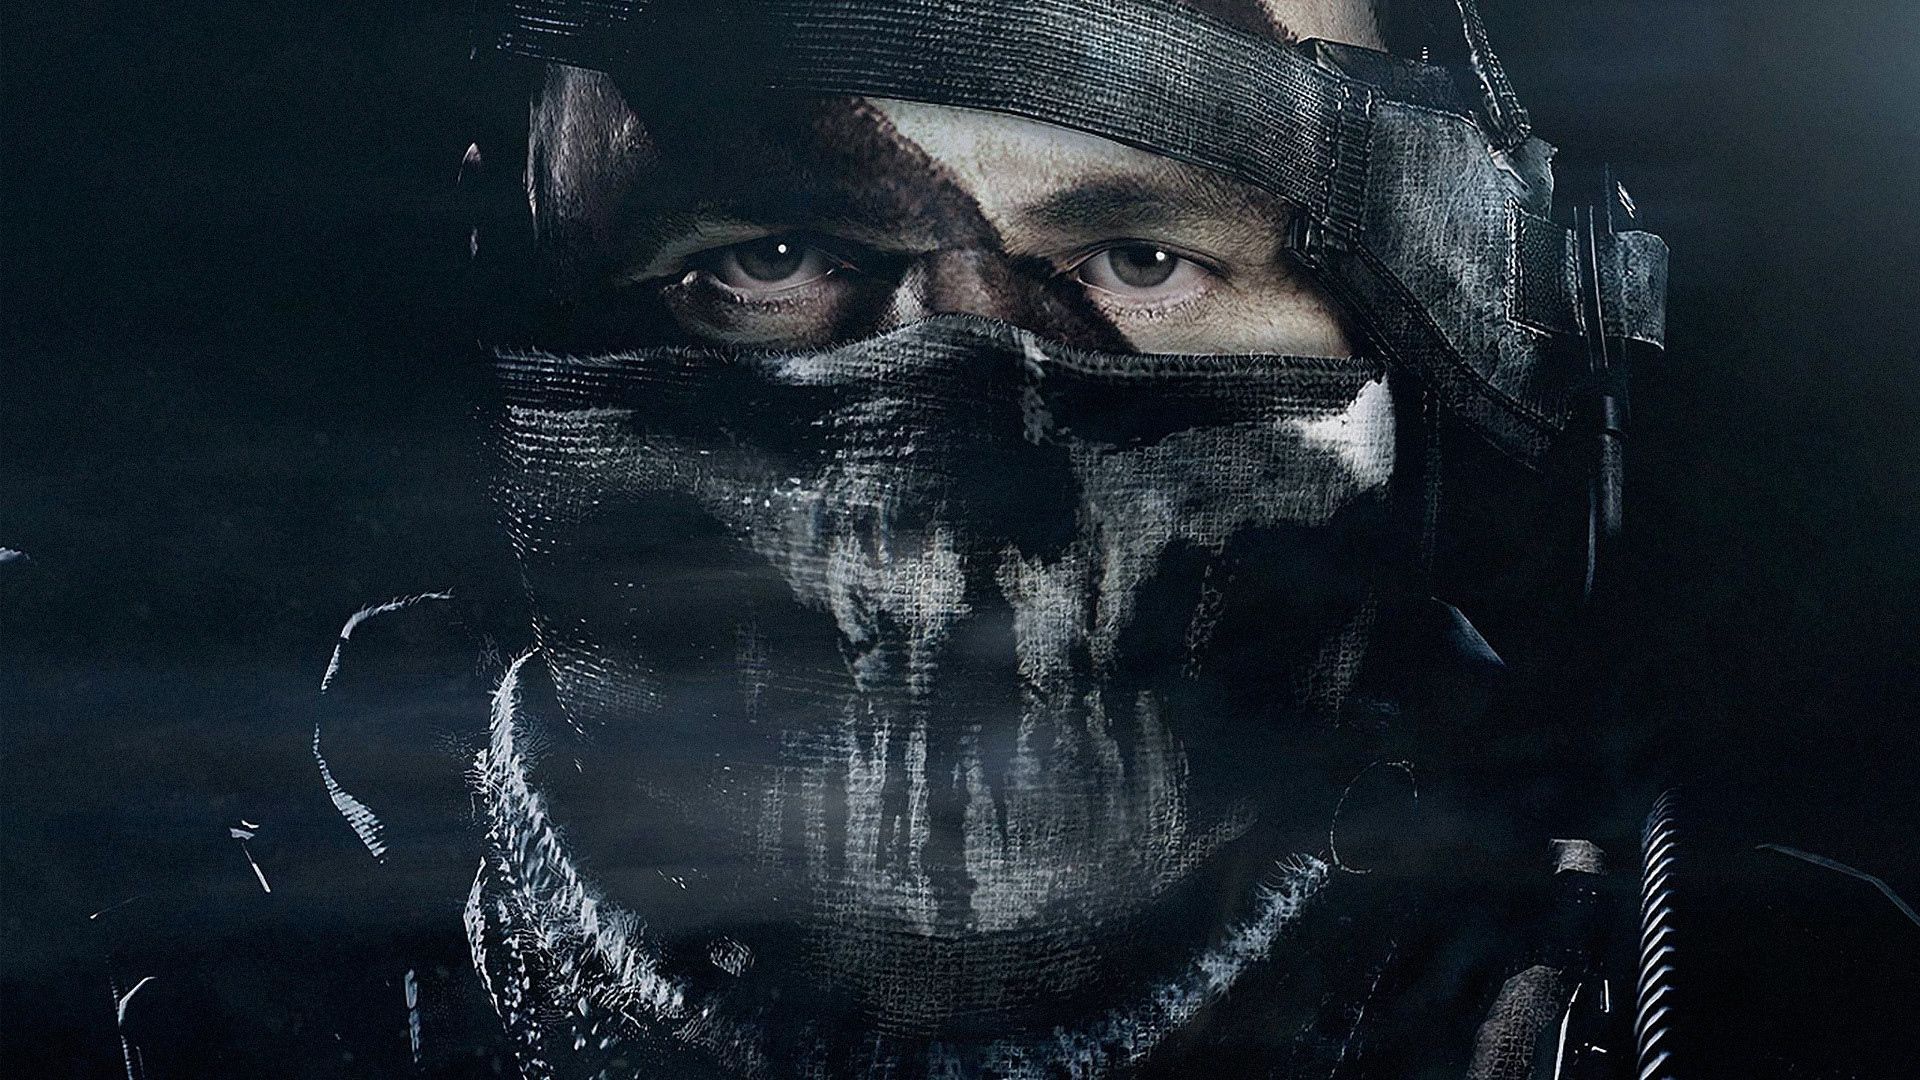 1920x1080 Wallpapers call of duty ghosts ...br.pinterest